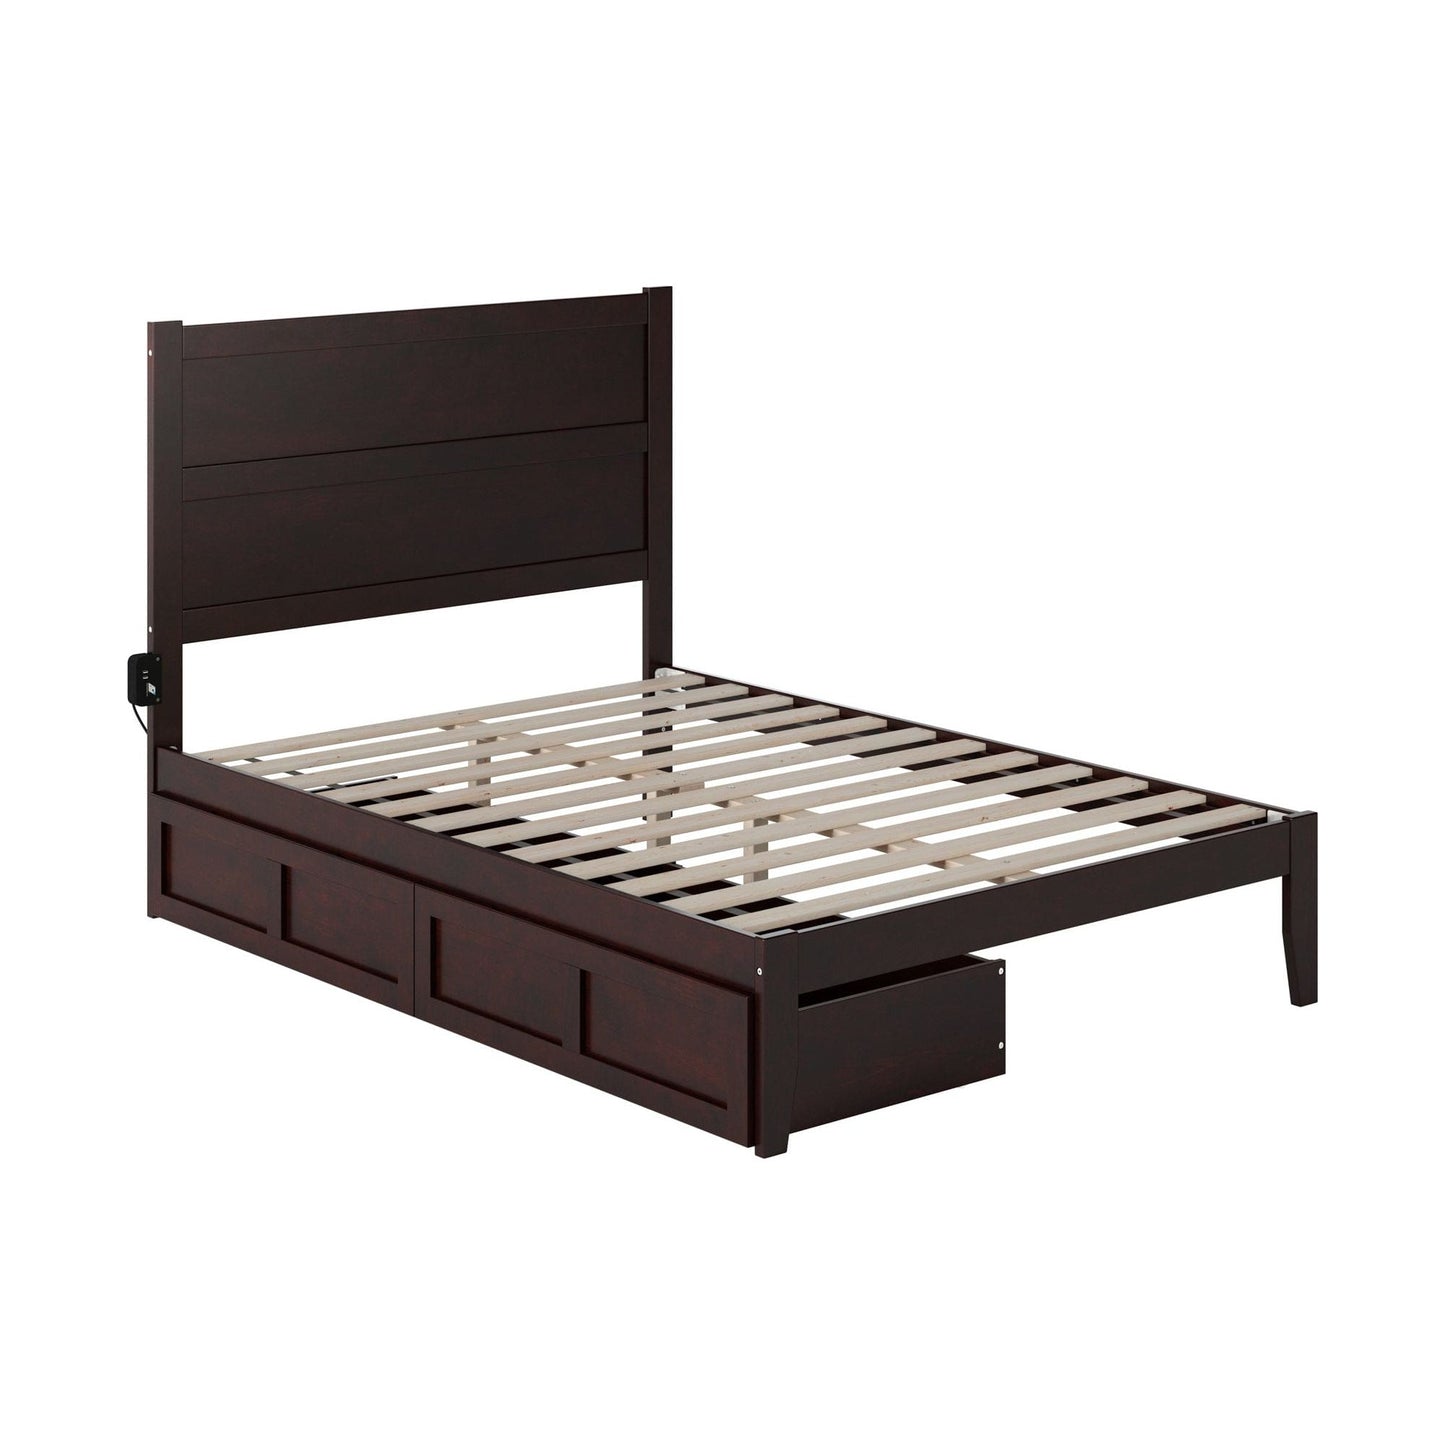 AFI Furnishings NoHo Full Bed with 2 Drawers in Espresso